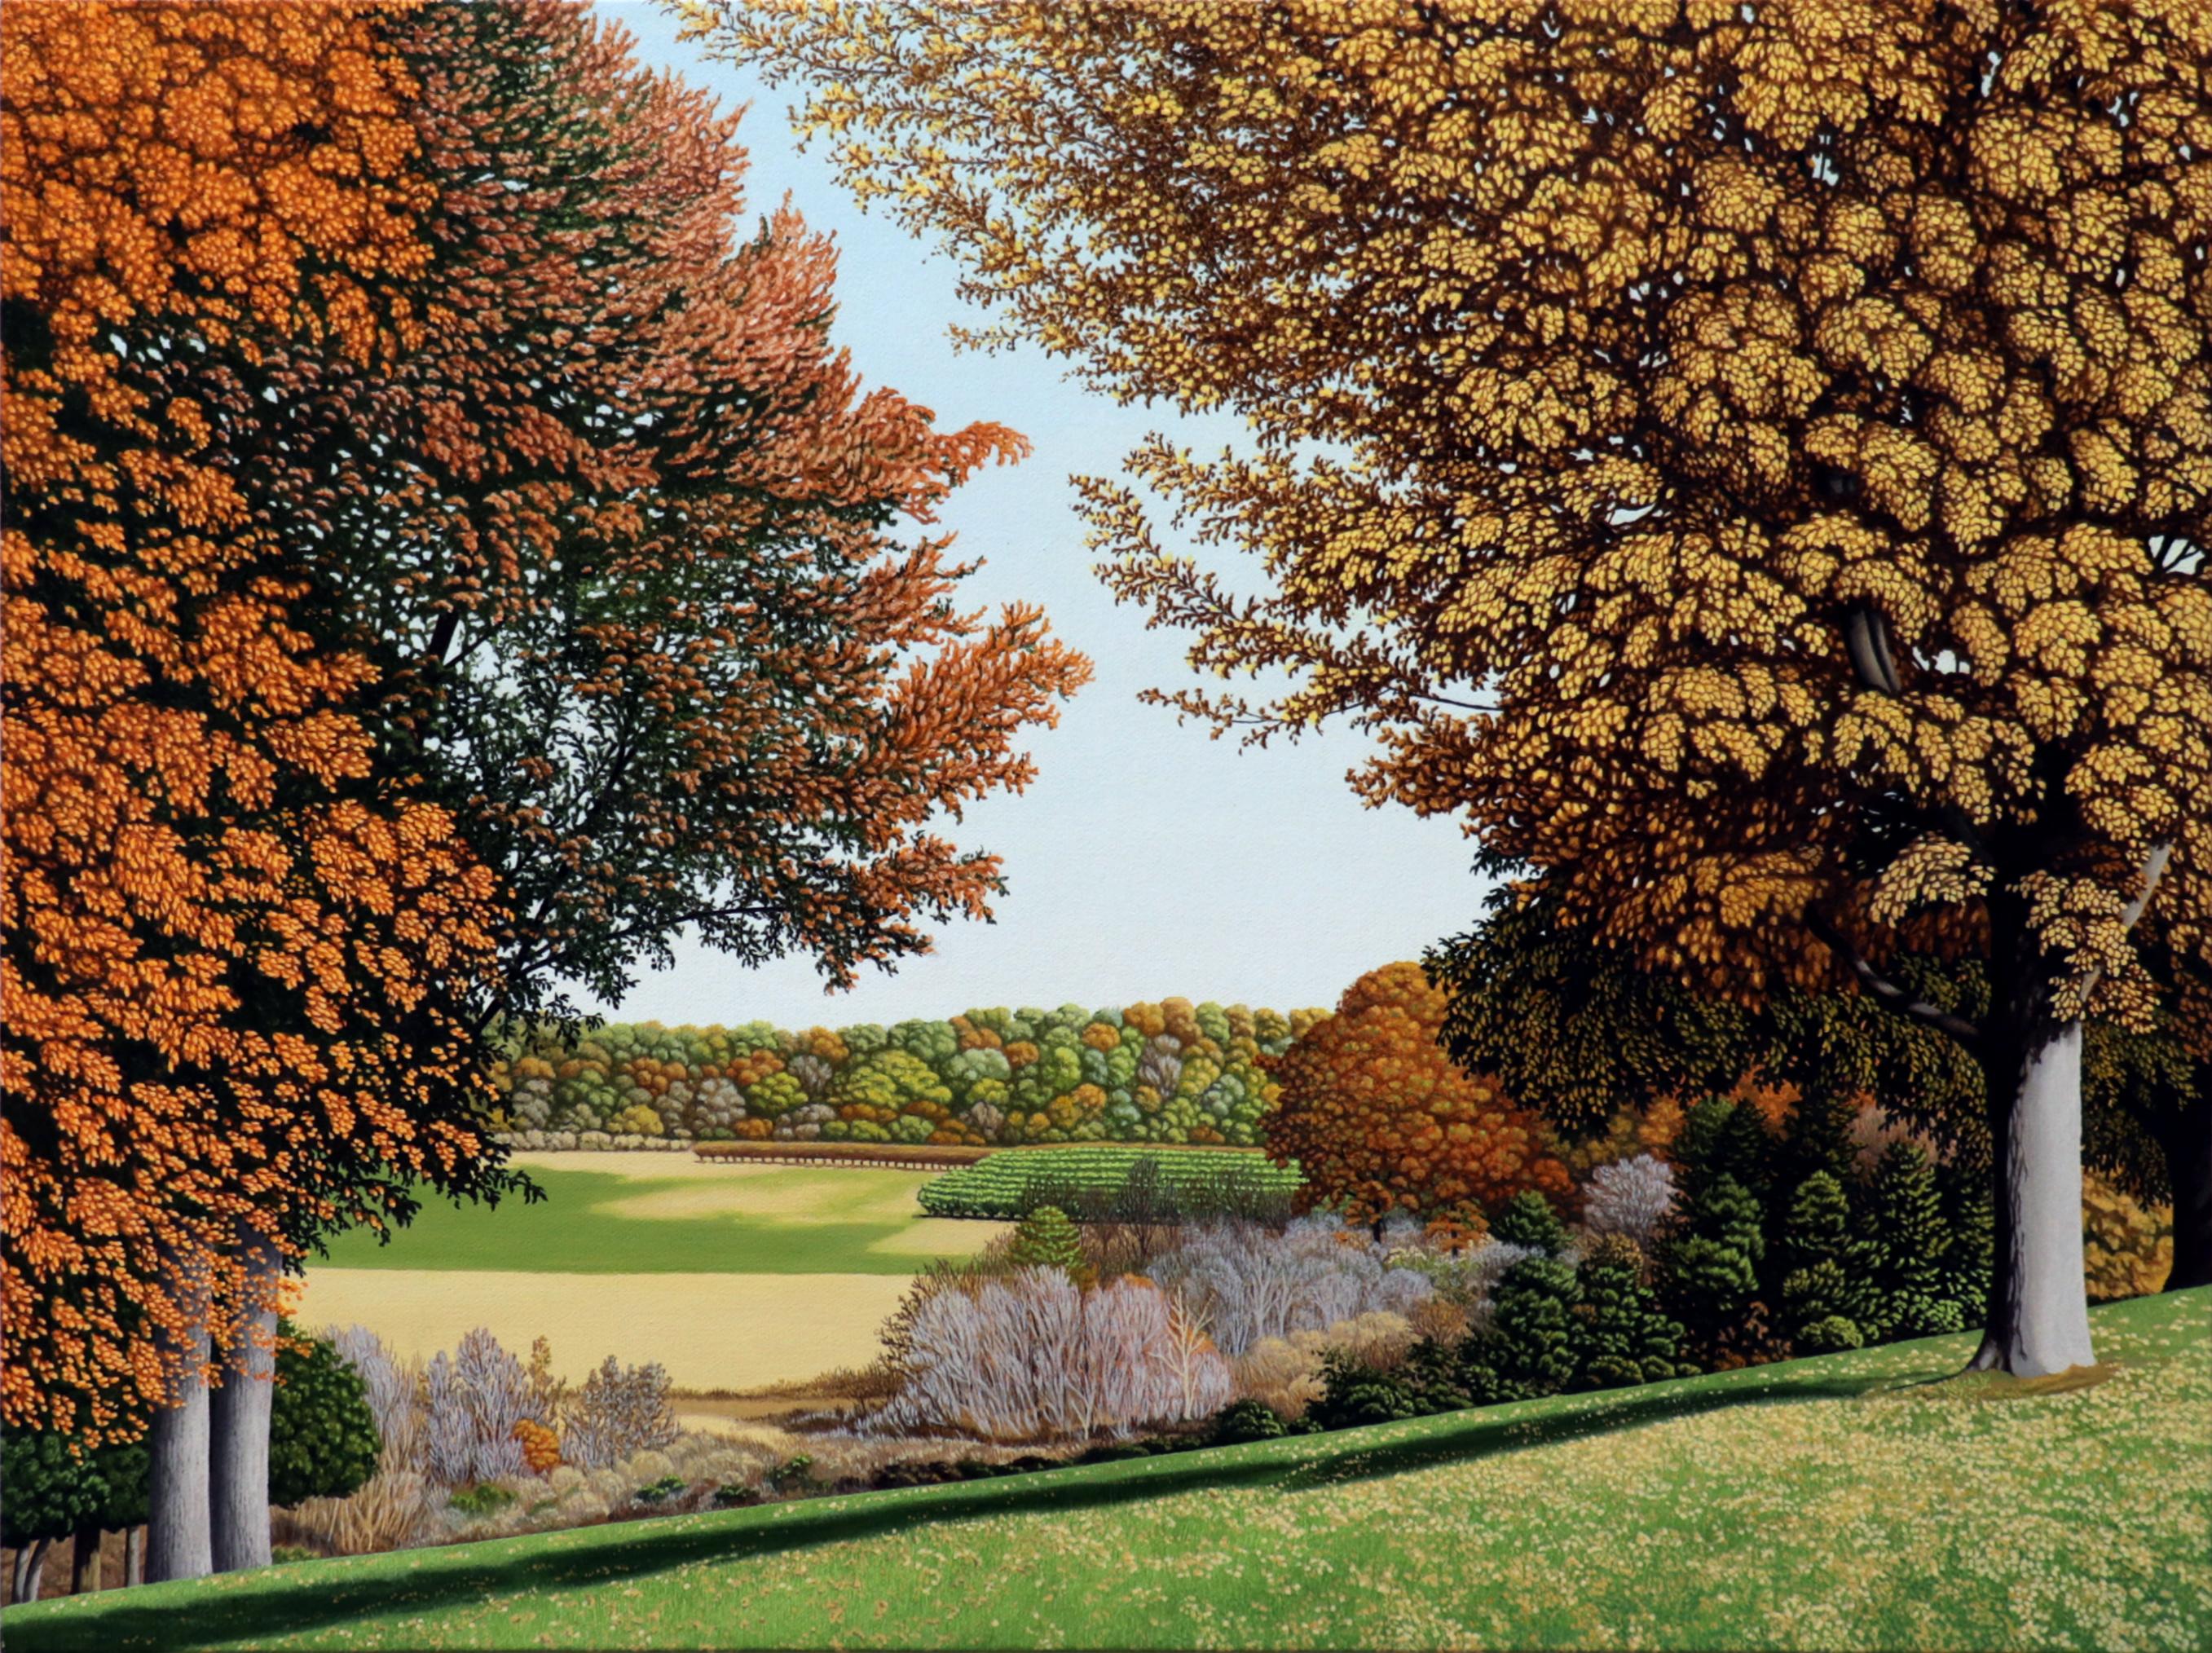 Anita Mazzucca Landscape Painting - A DIFFERENT VIEW OF MONMOUTH BATTLEGROUND - Contemporary Realism / Landscape